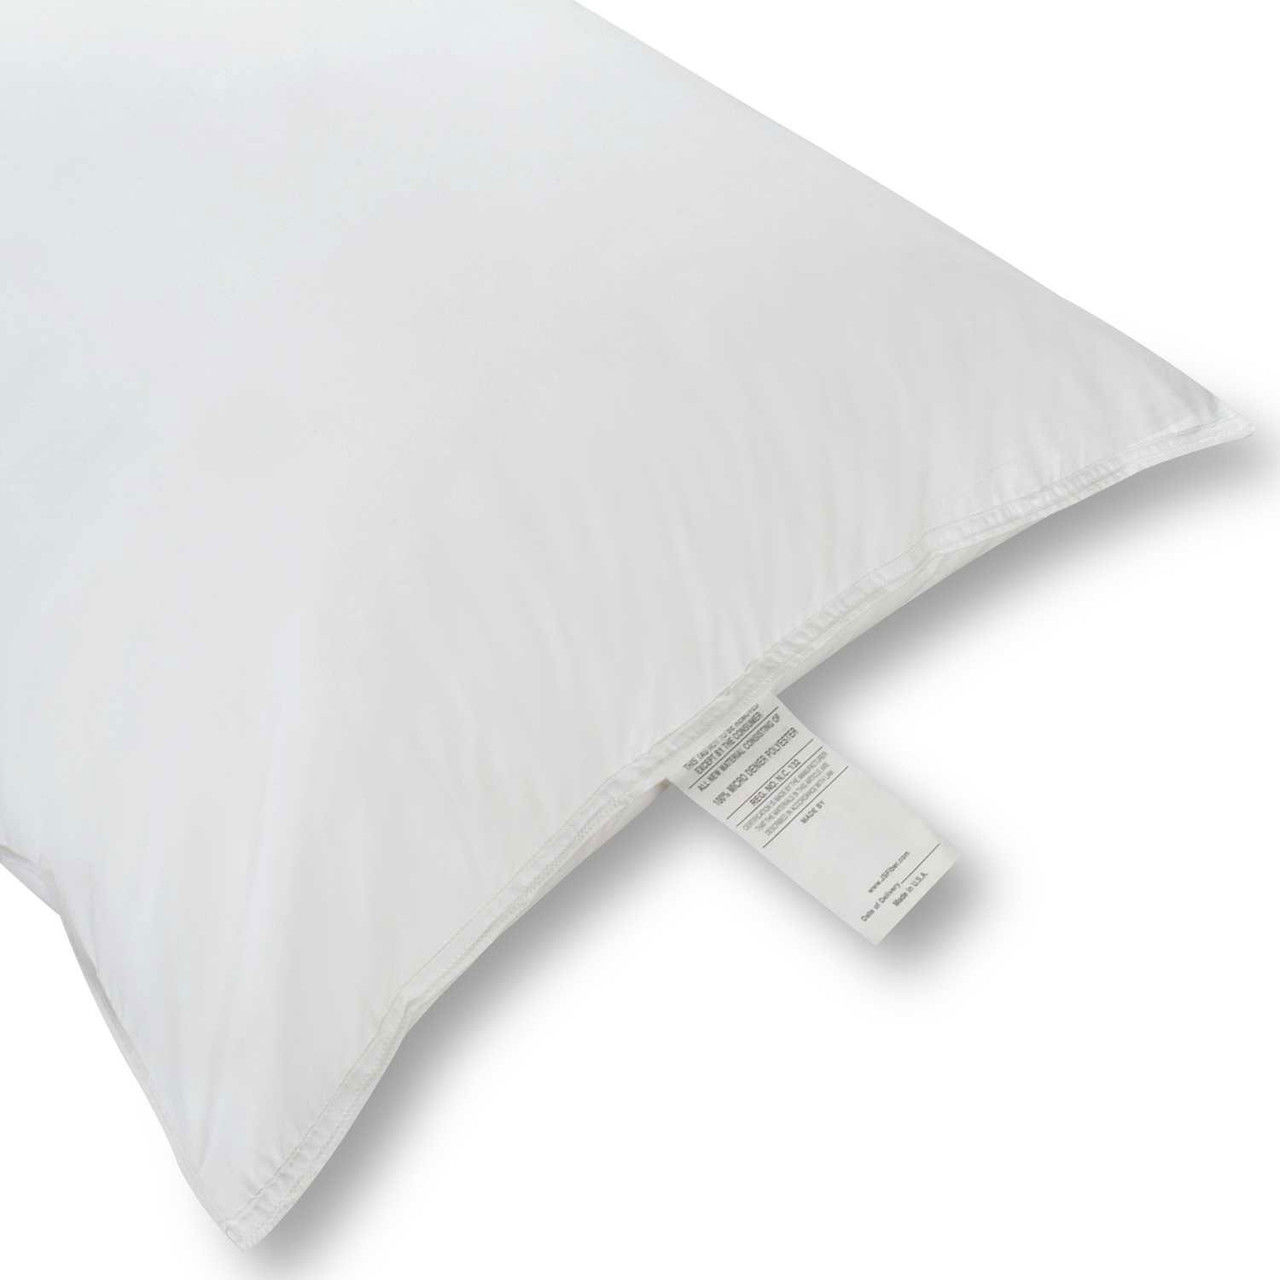 Are js fiber pillows suitable for all types of sleepers?